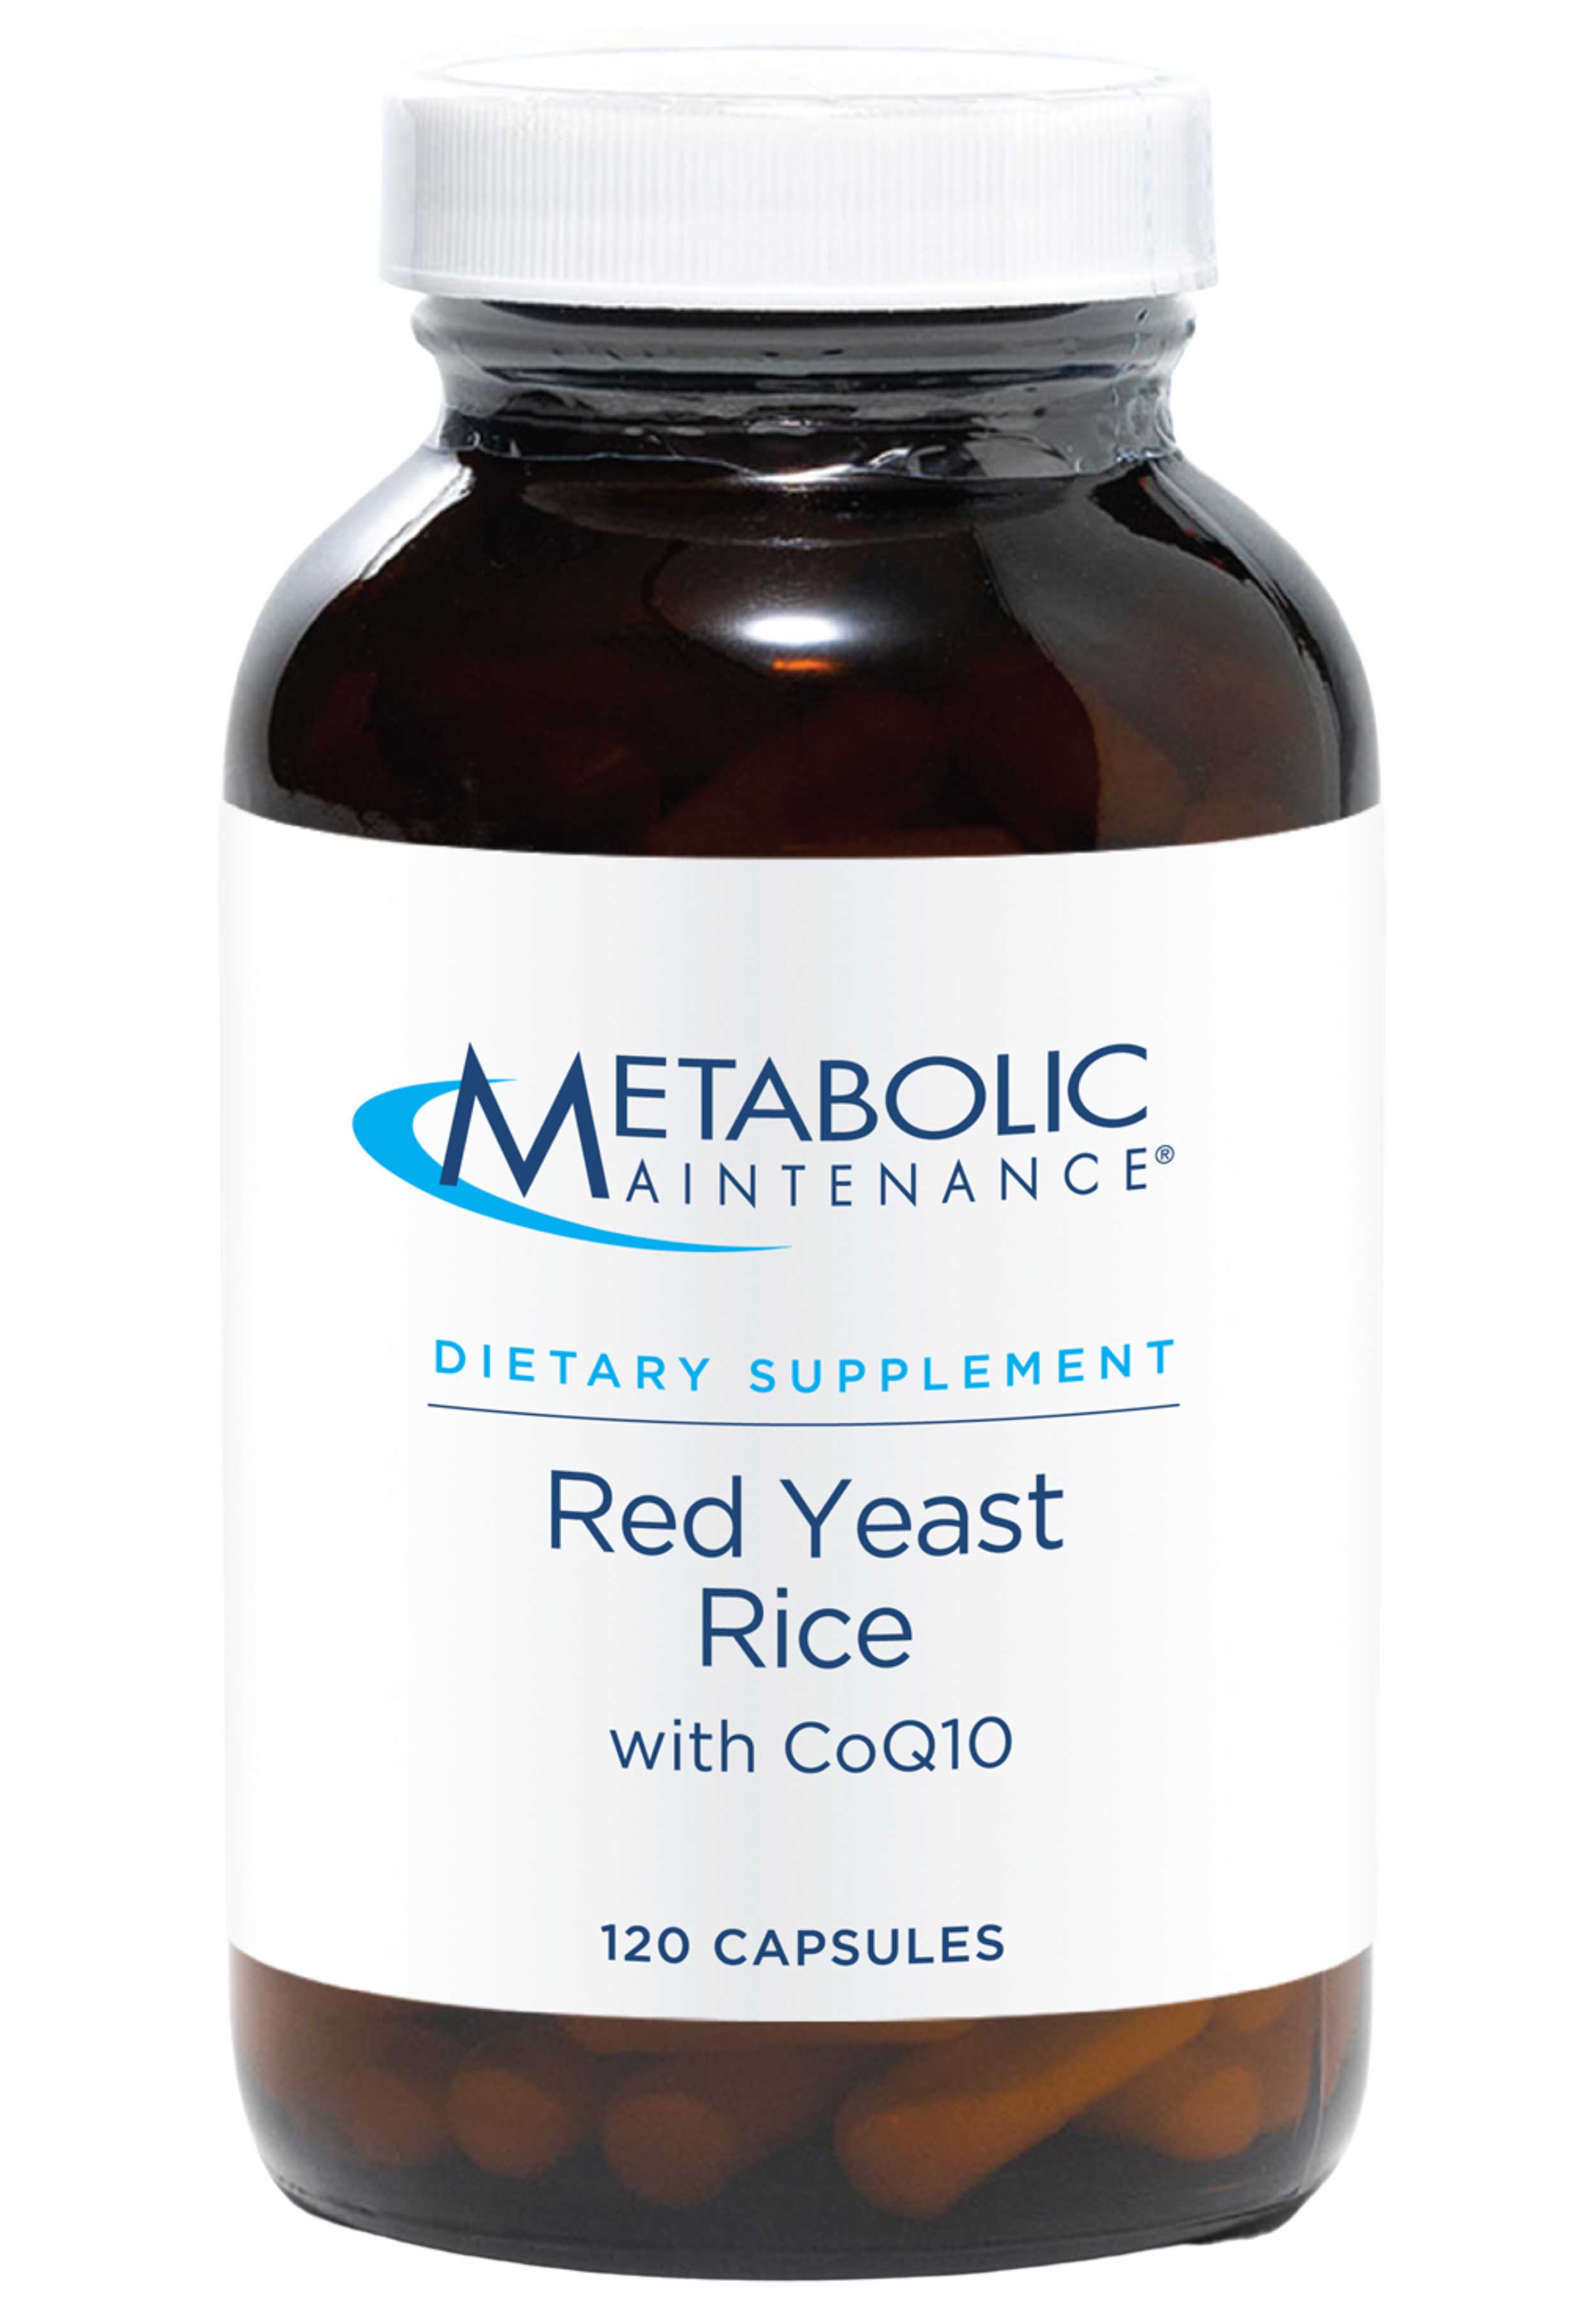 Metabolic Maintenance Red Yeast Rice with CoQ10